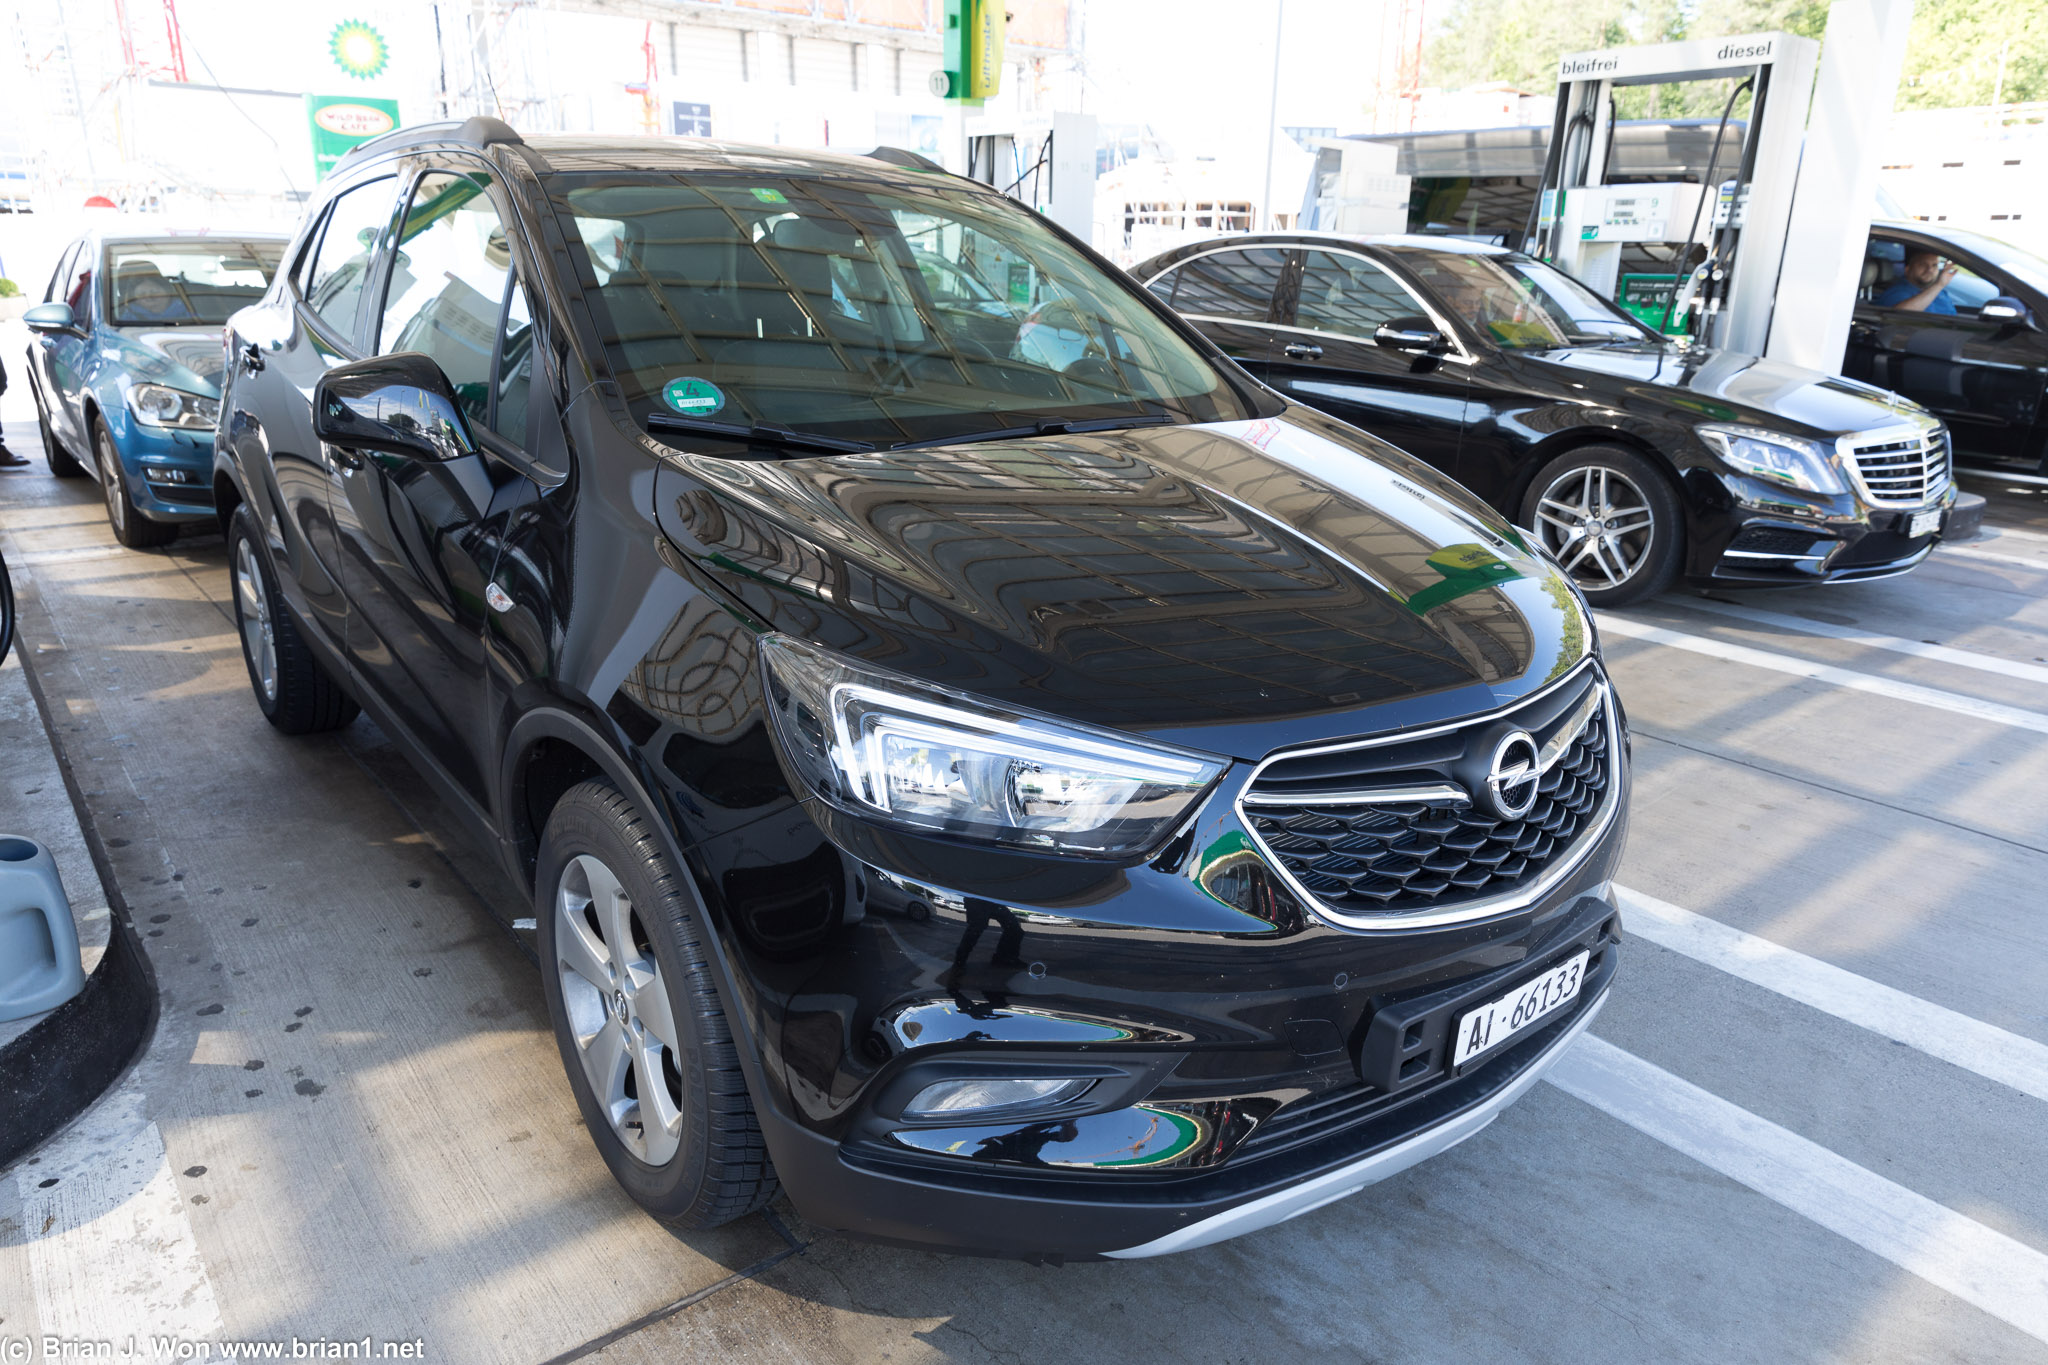 Our trusty steed, the Opel Mokka. Or as Sam said, "why is it so big?"